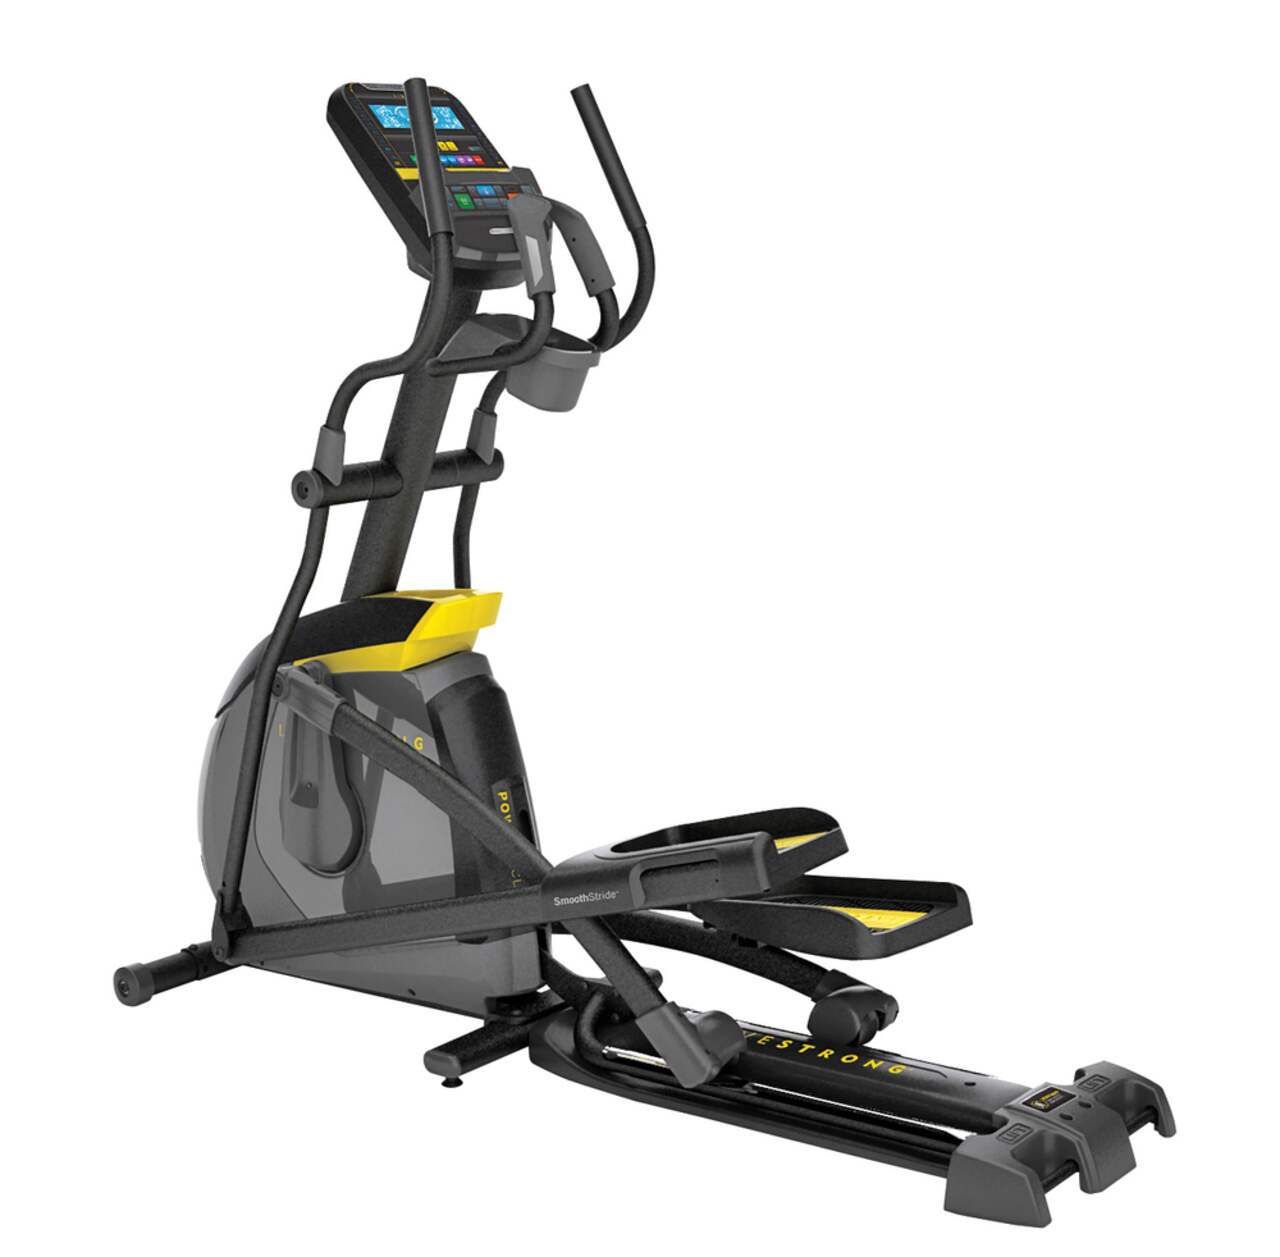 https://media-www.canadiantire.ca/product/playing/exercise/exercise-equipment/0840690/livestrong-ls10-0e-elliptical-bf35827c-1145-4dca-8bab-decb3f4f032b.png?imdensity=1&imwidth=640&impolicy=mZoom